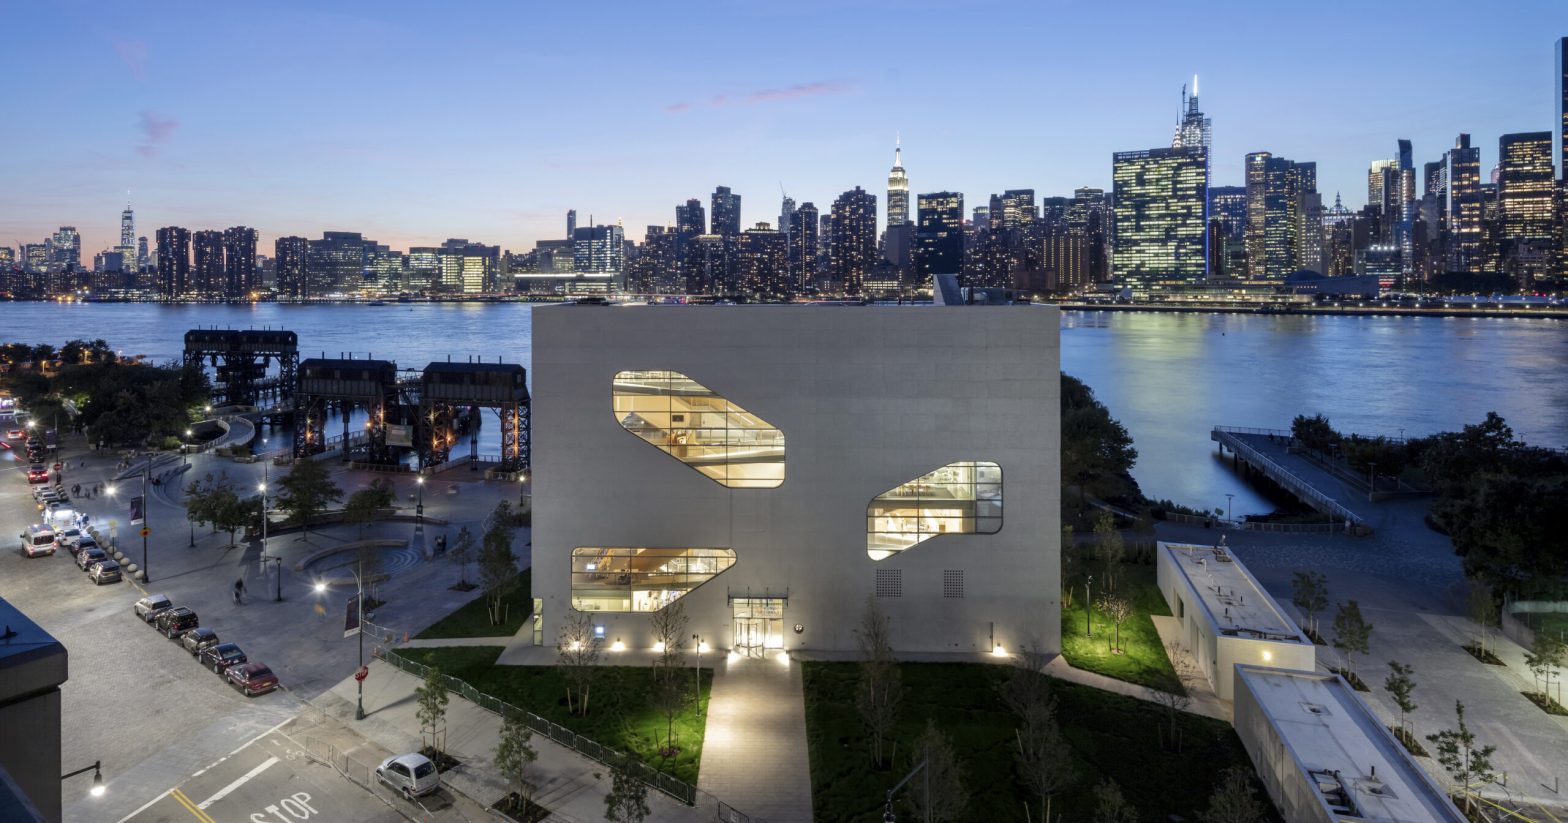 35 Best Architecture and Design Firms in New York